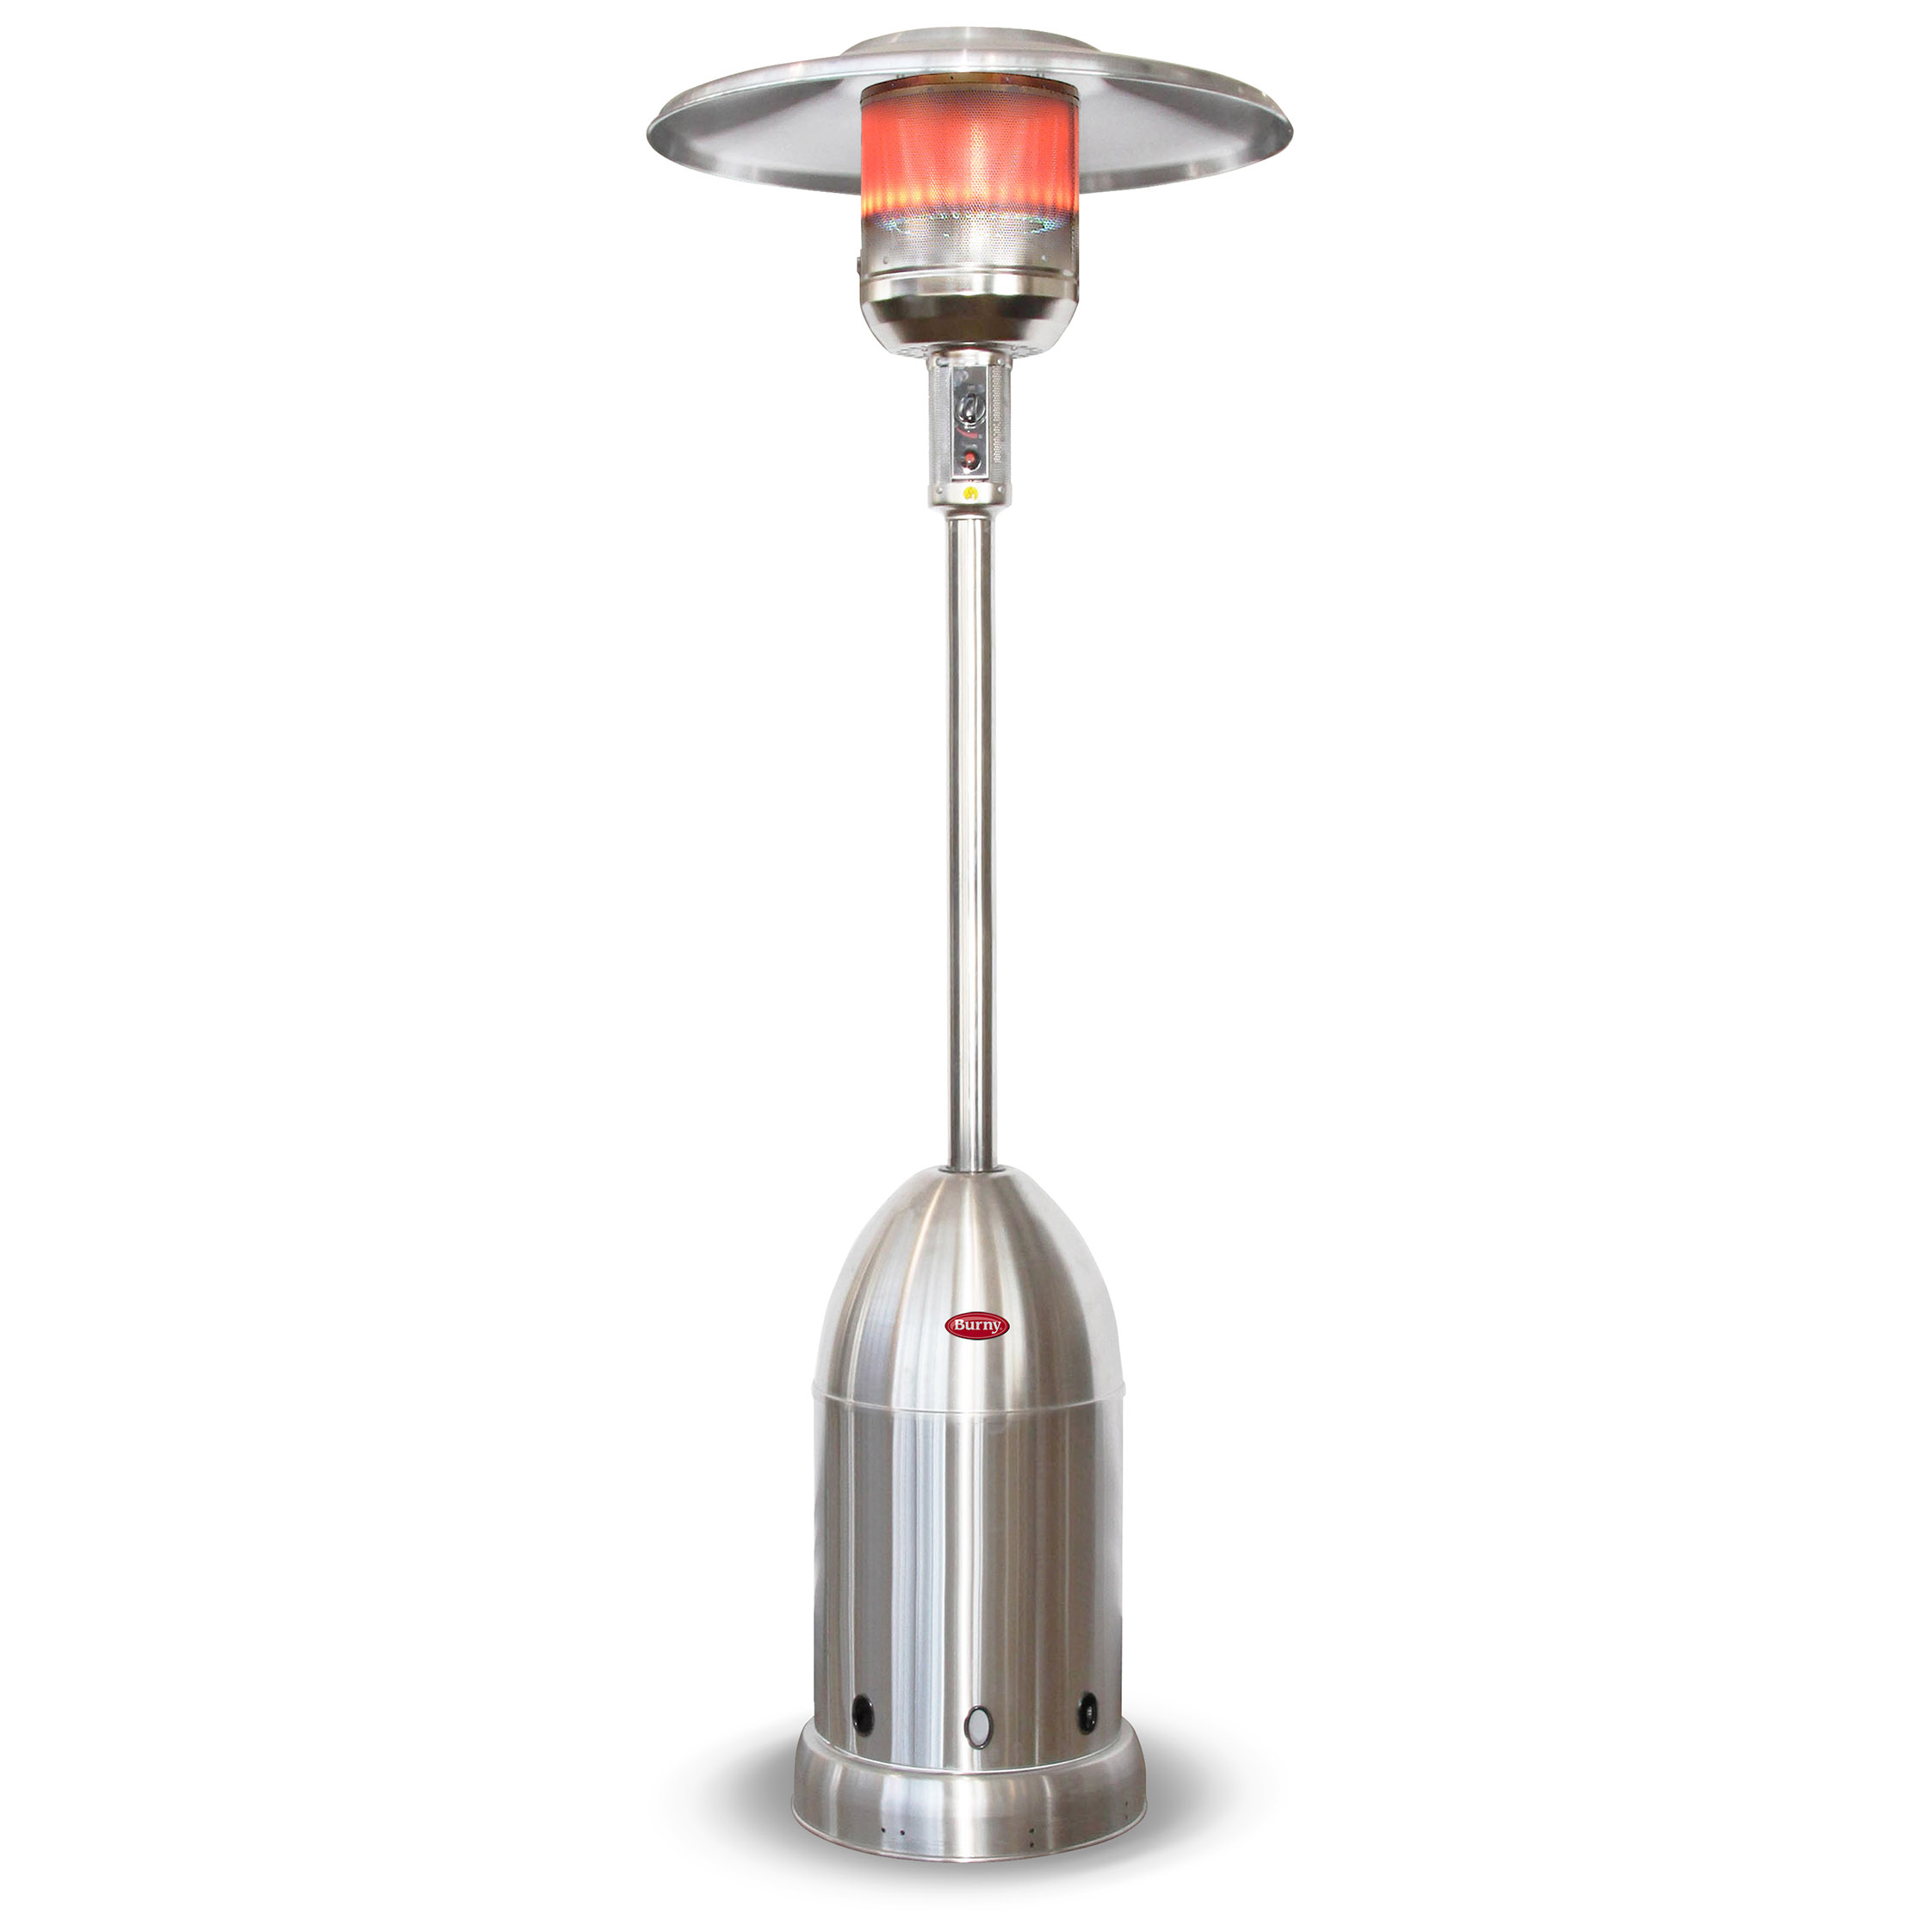 Burny Classical Burner Stainless Steel Gas Heater 2940 with regard to measurements 2244 X 2244